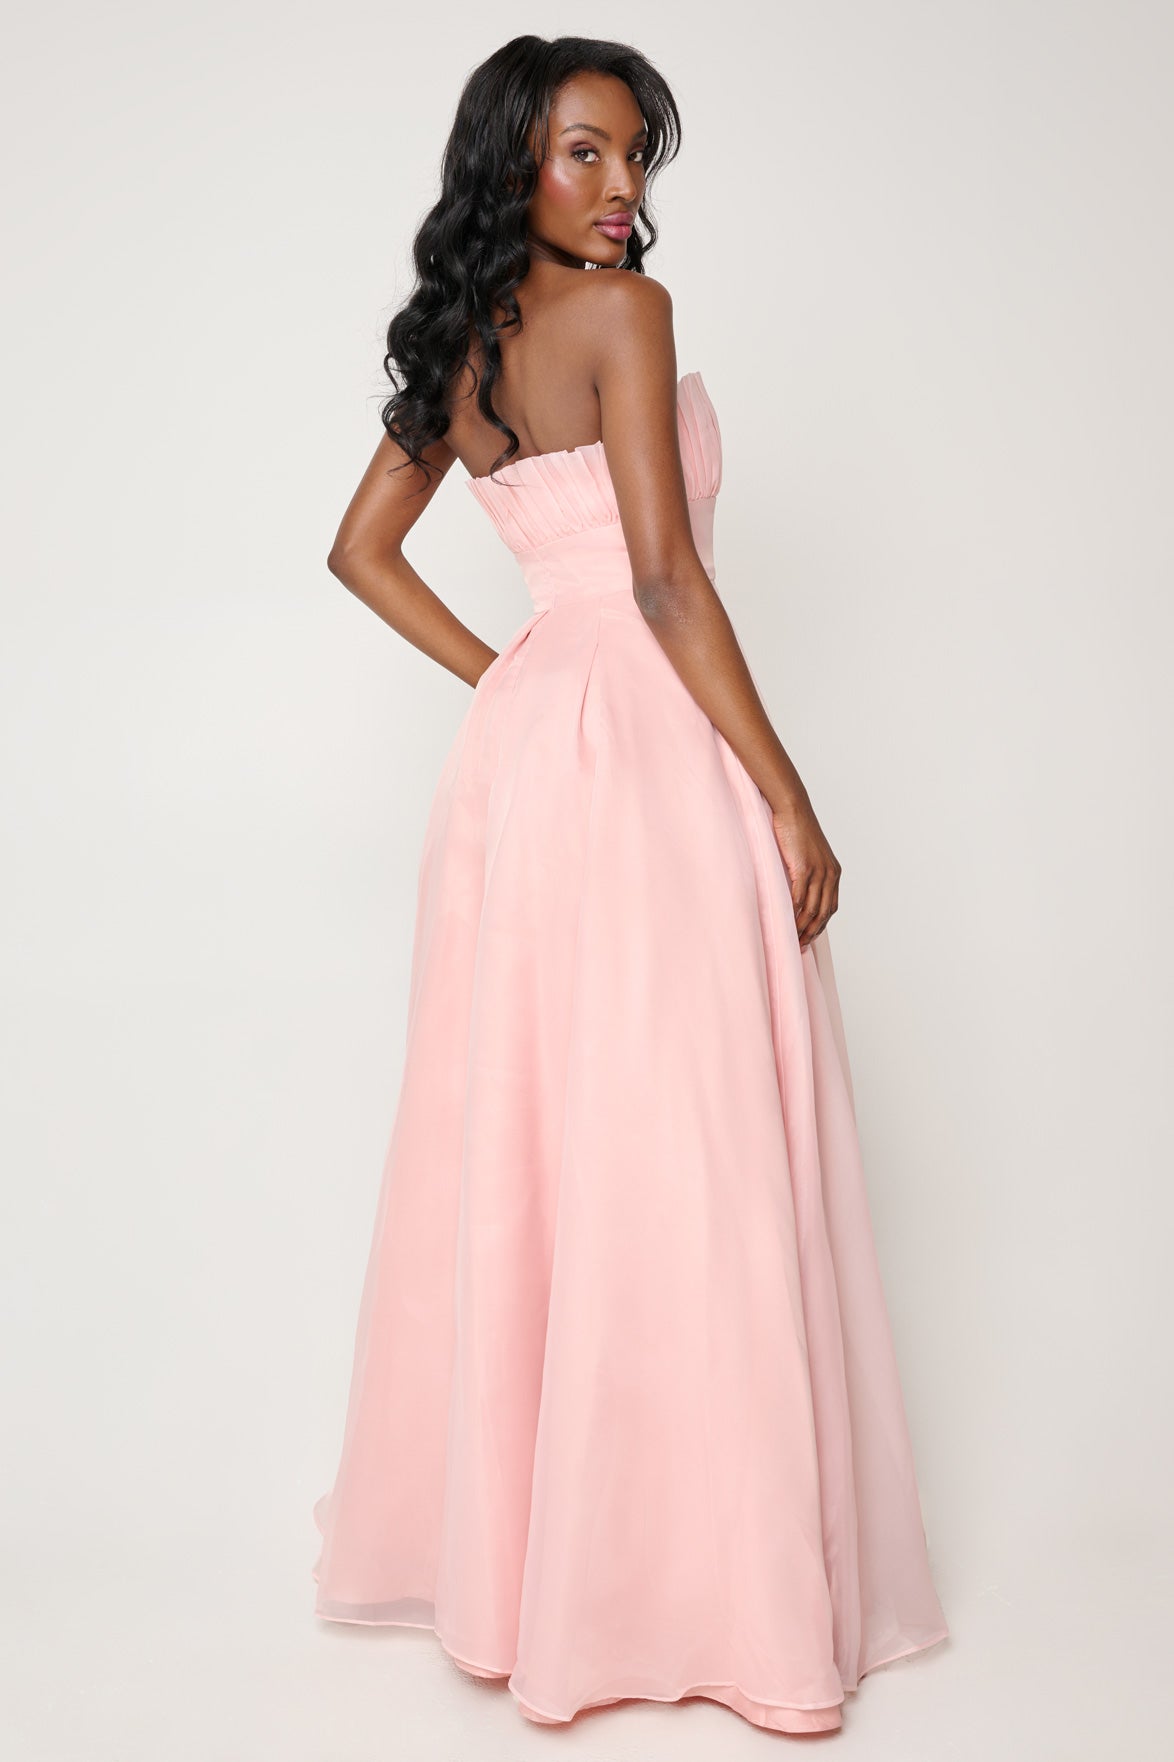 Evelyn Gown in Blush by Bariano - RENTAL